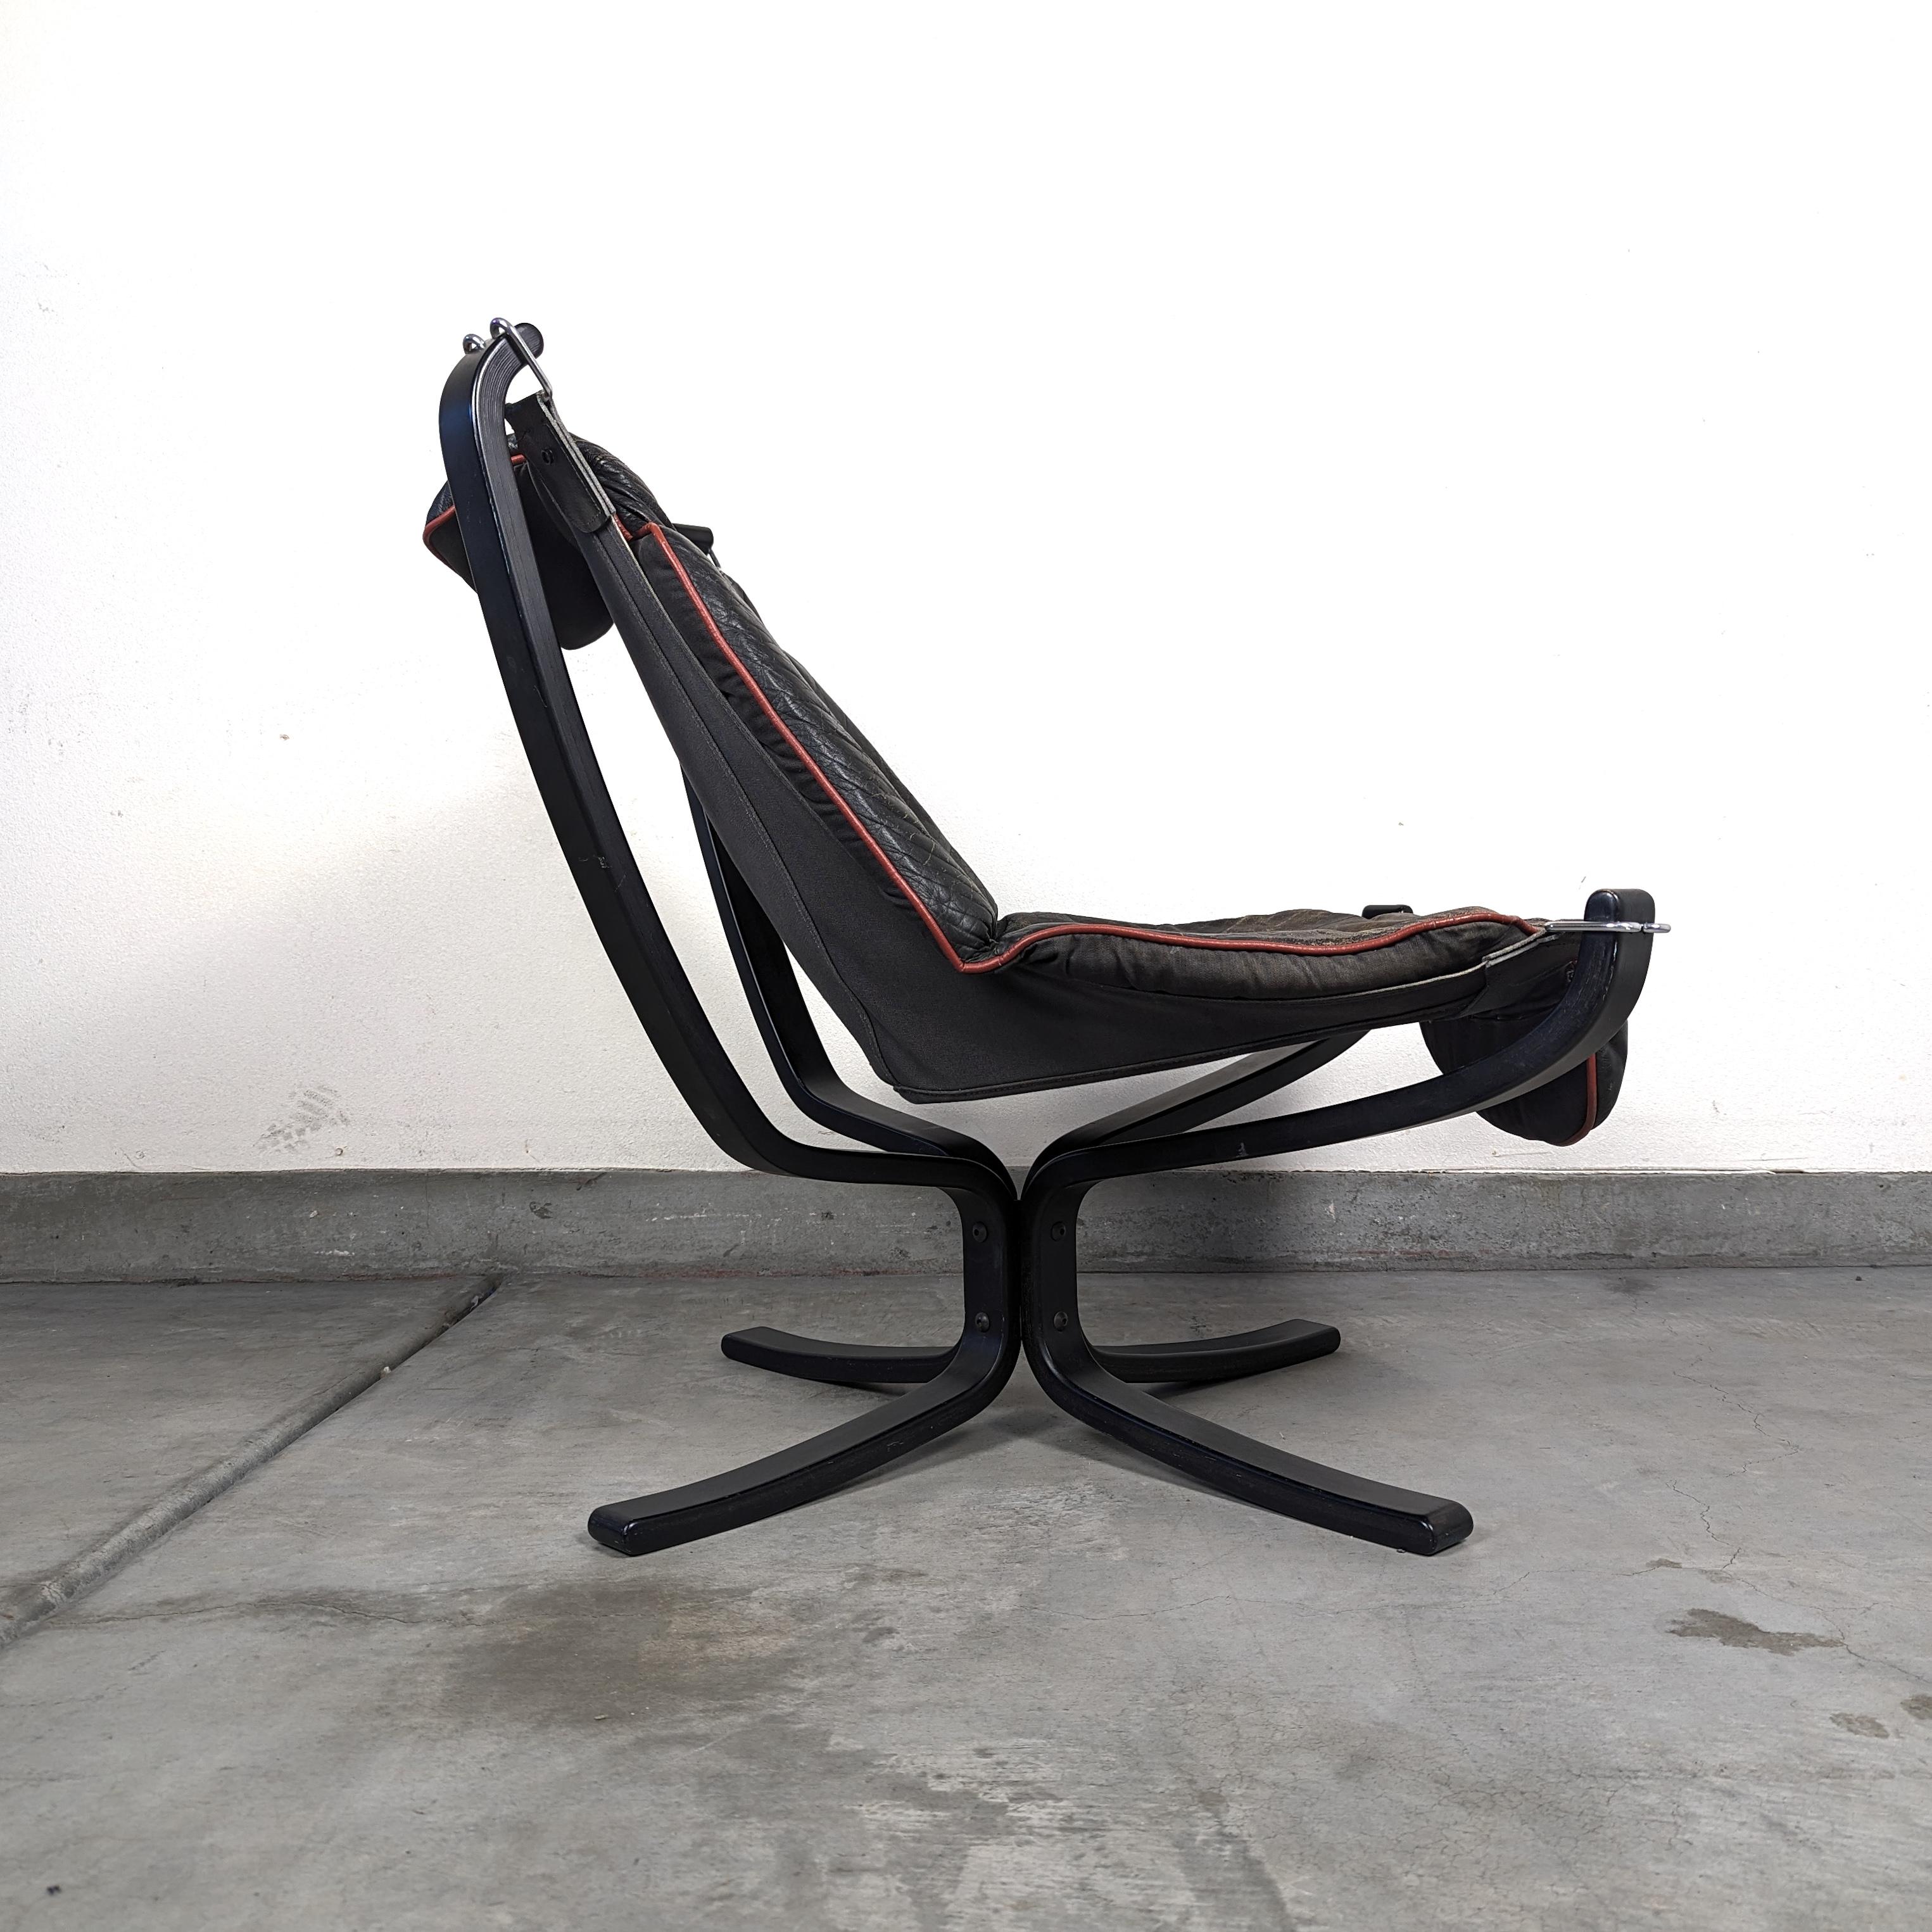 Leather Mid Century Modern Falcon Lounge Chair by Sigurd Resell for Vatne Mobler, c1970s For Sale